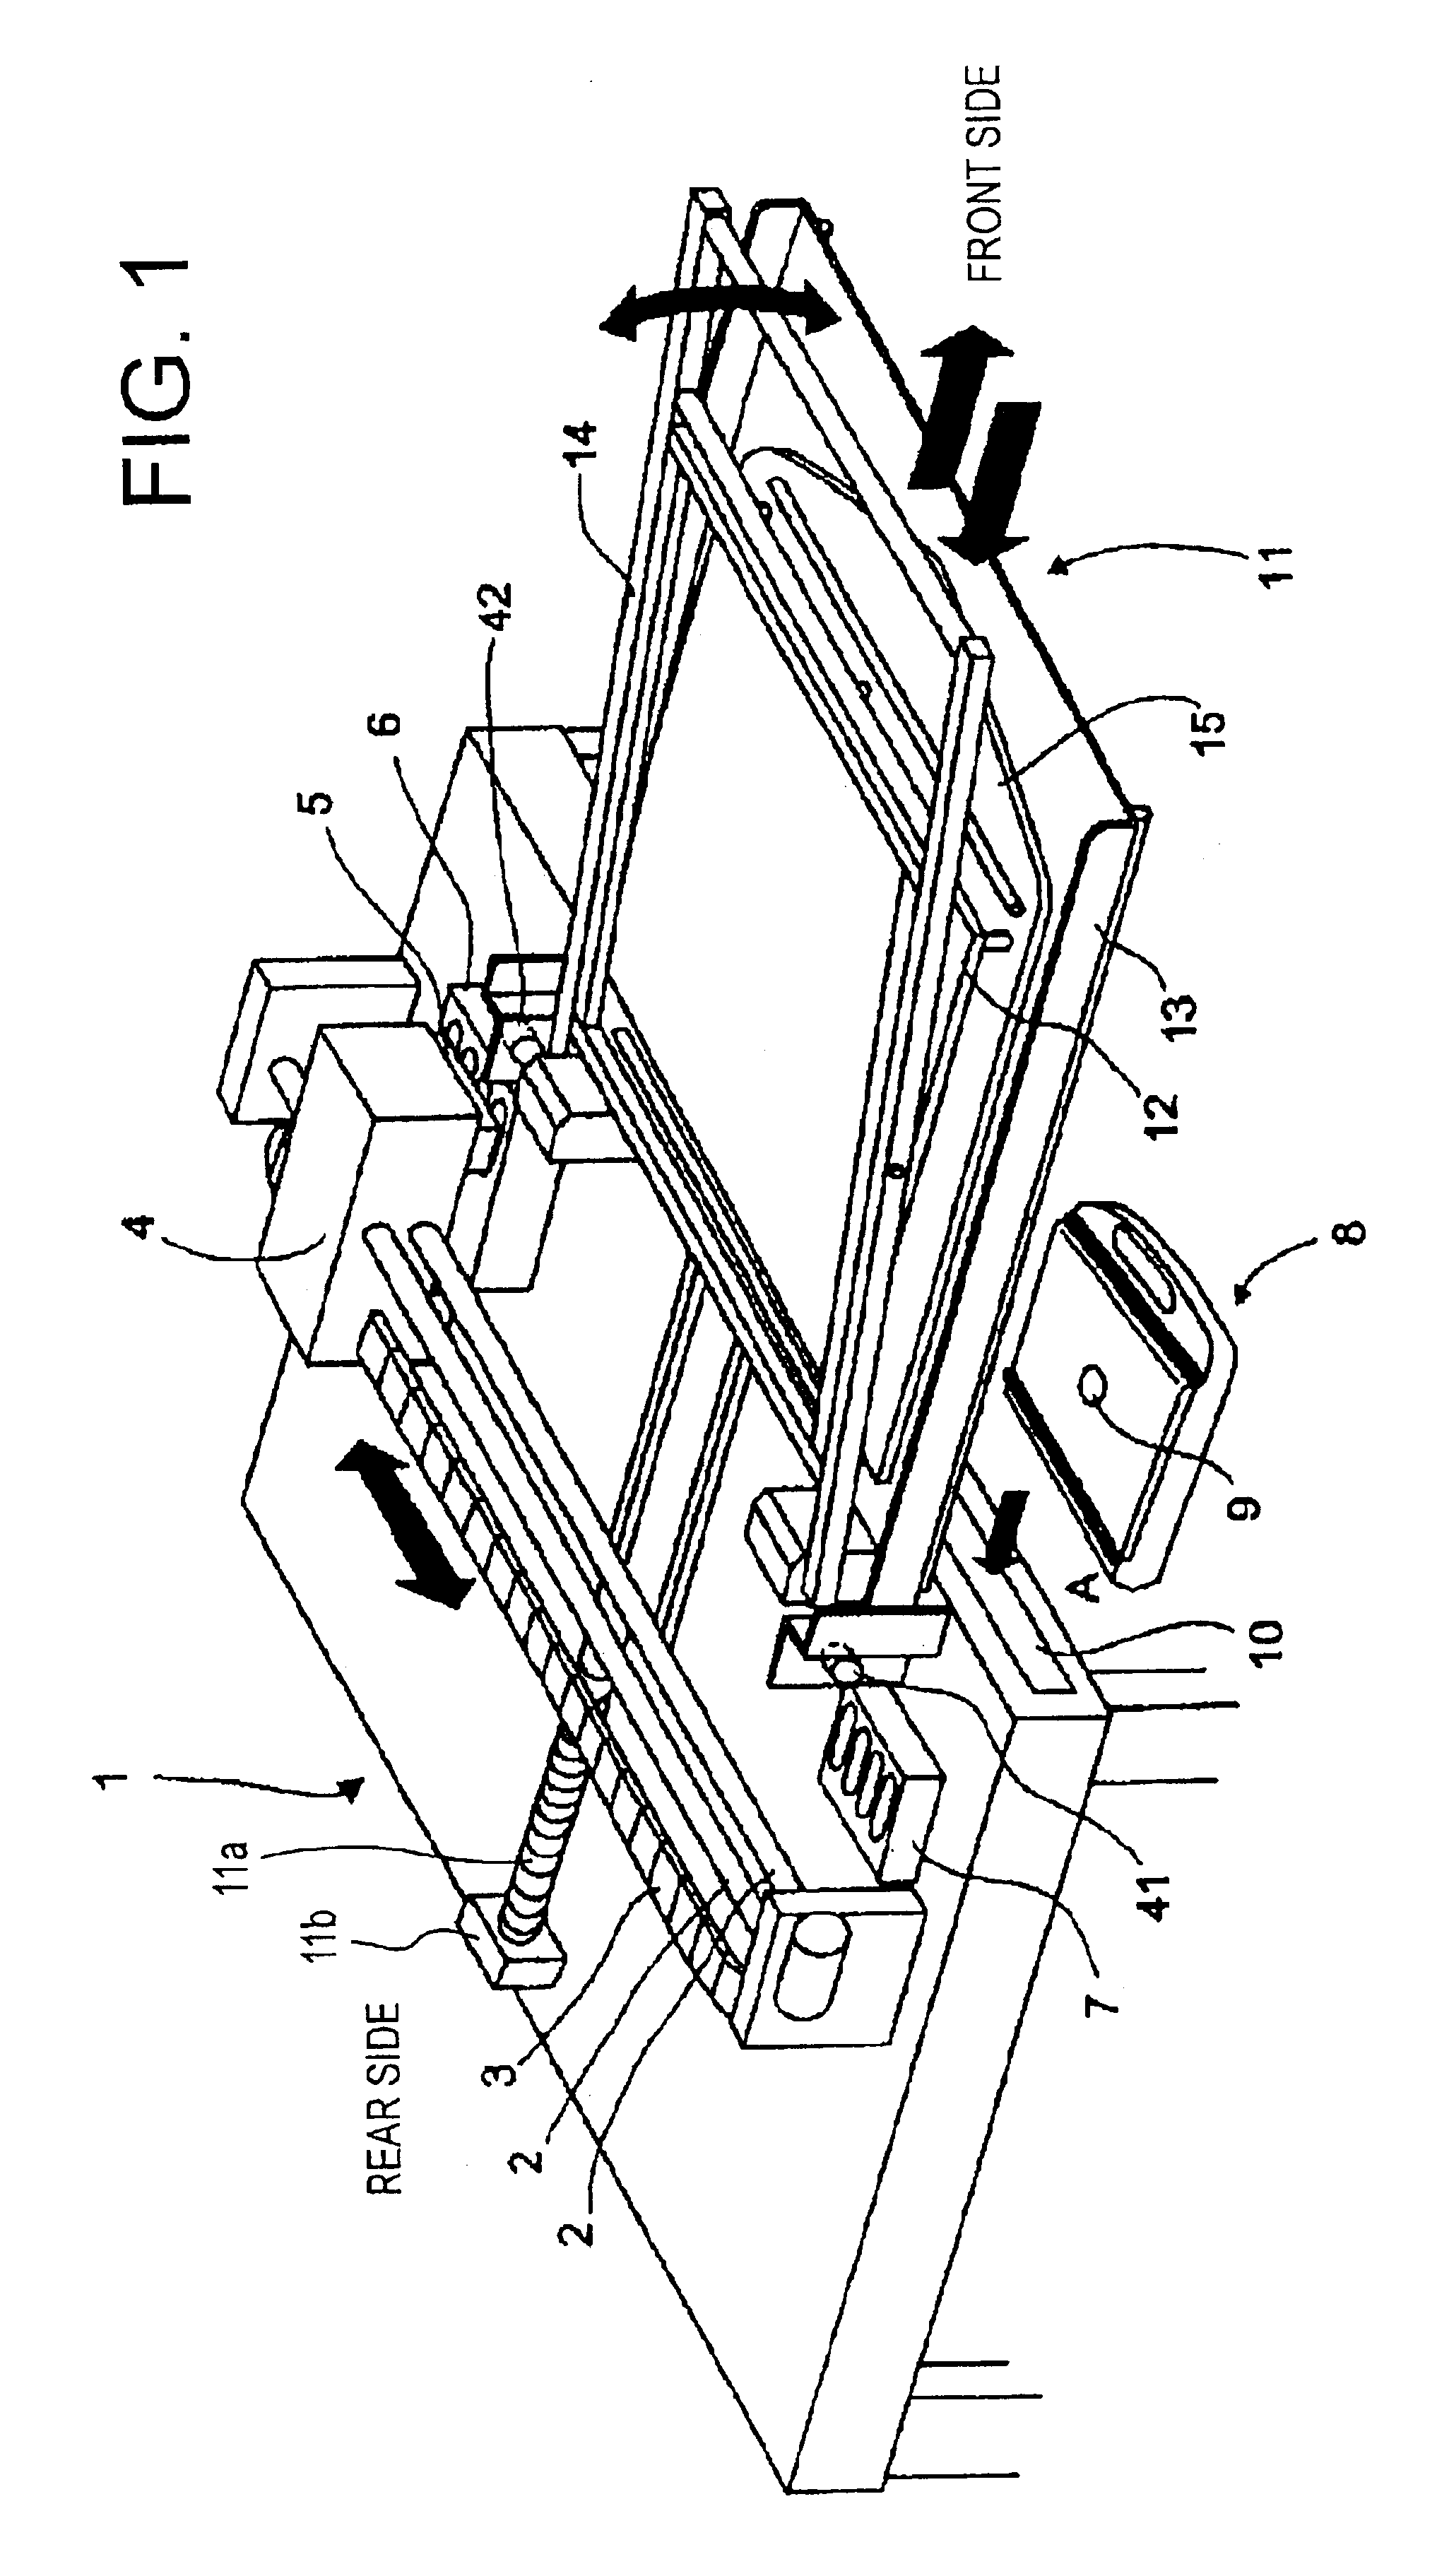 Platen device for holding workpiece in ink-jet printer